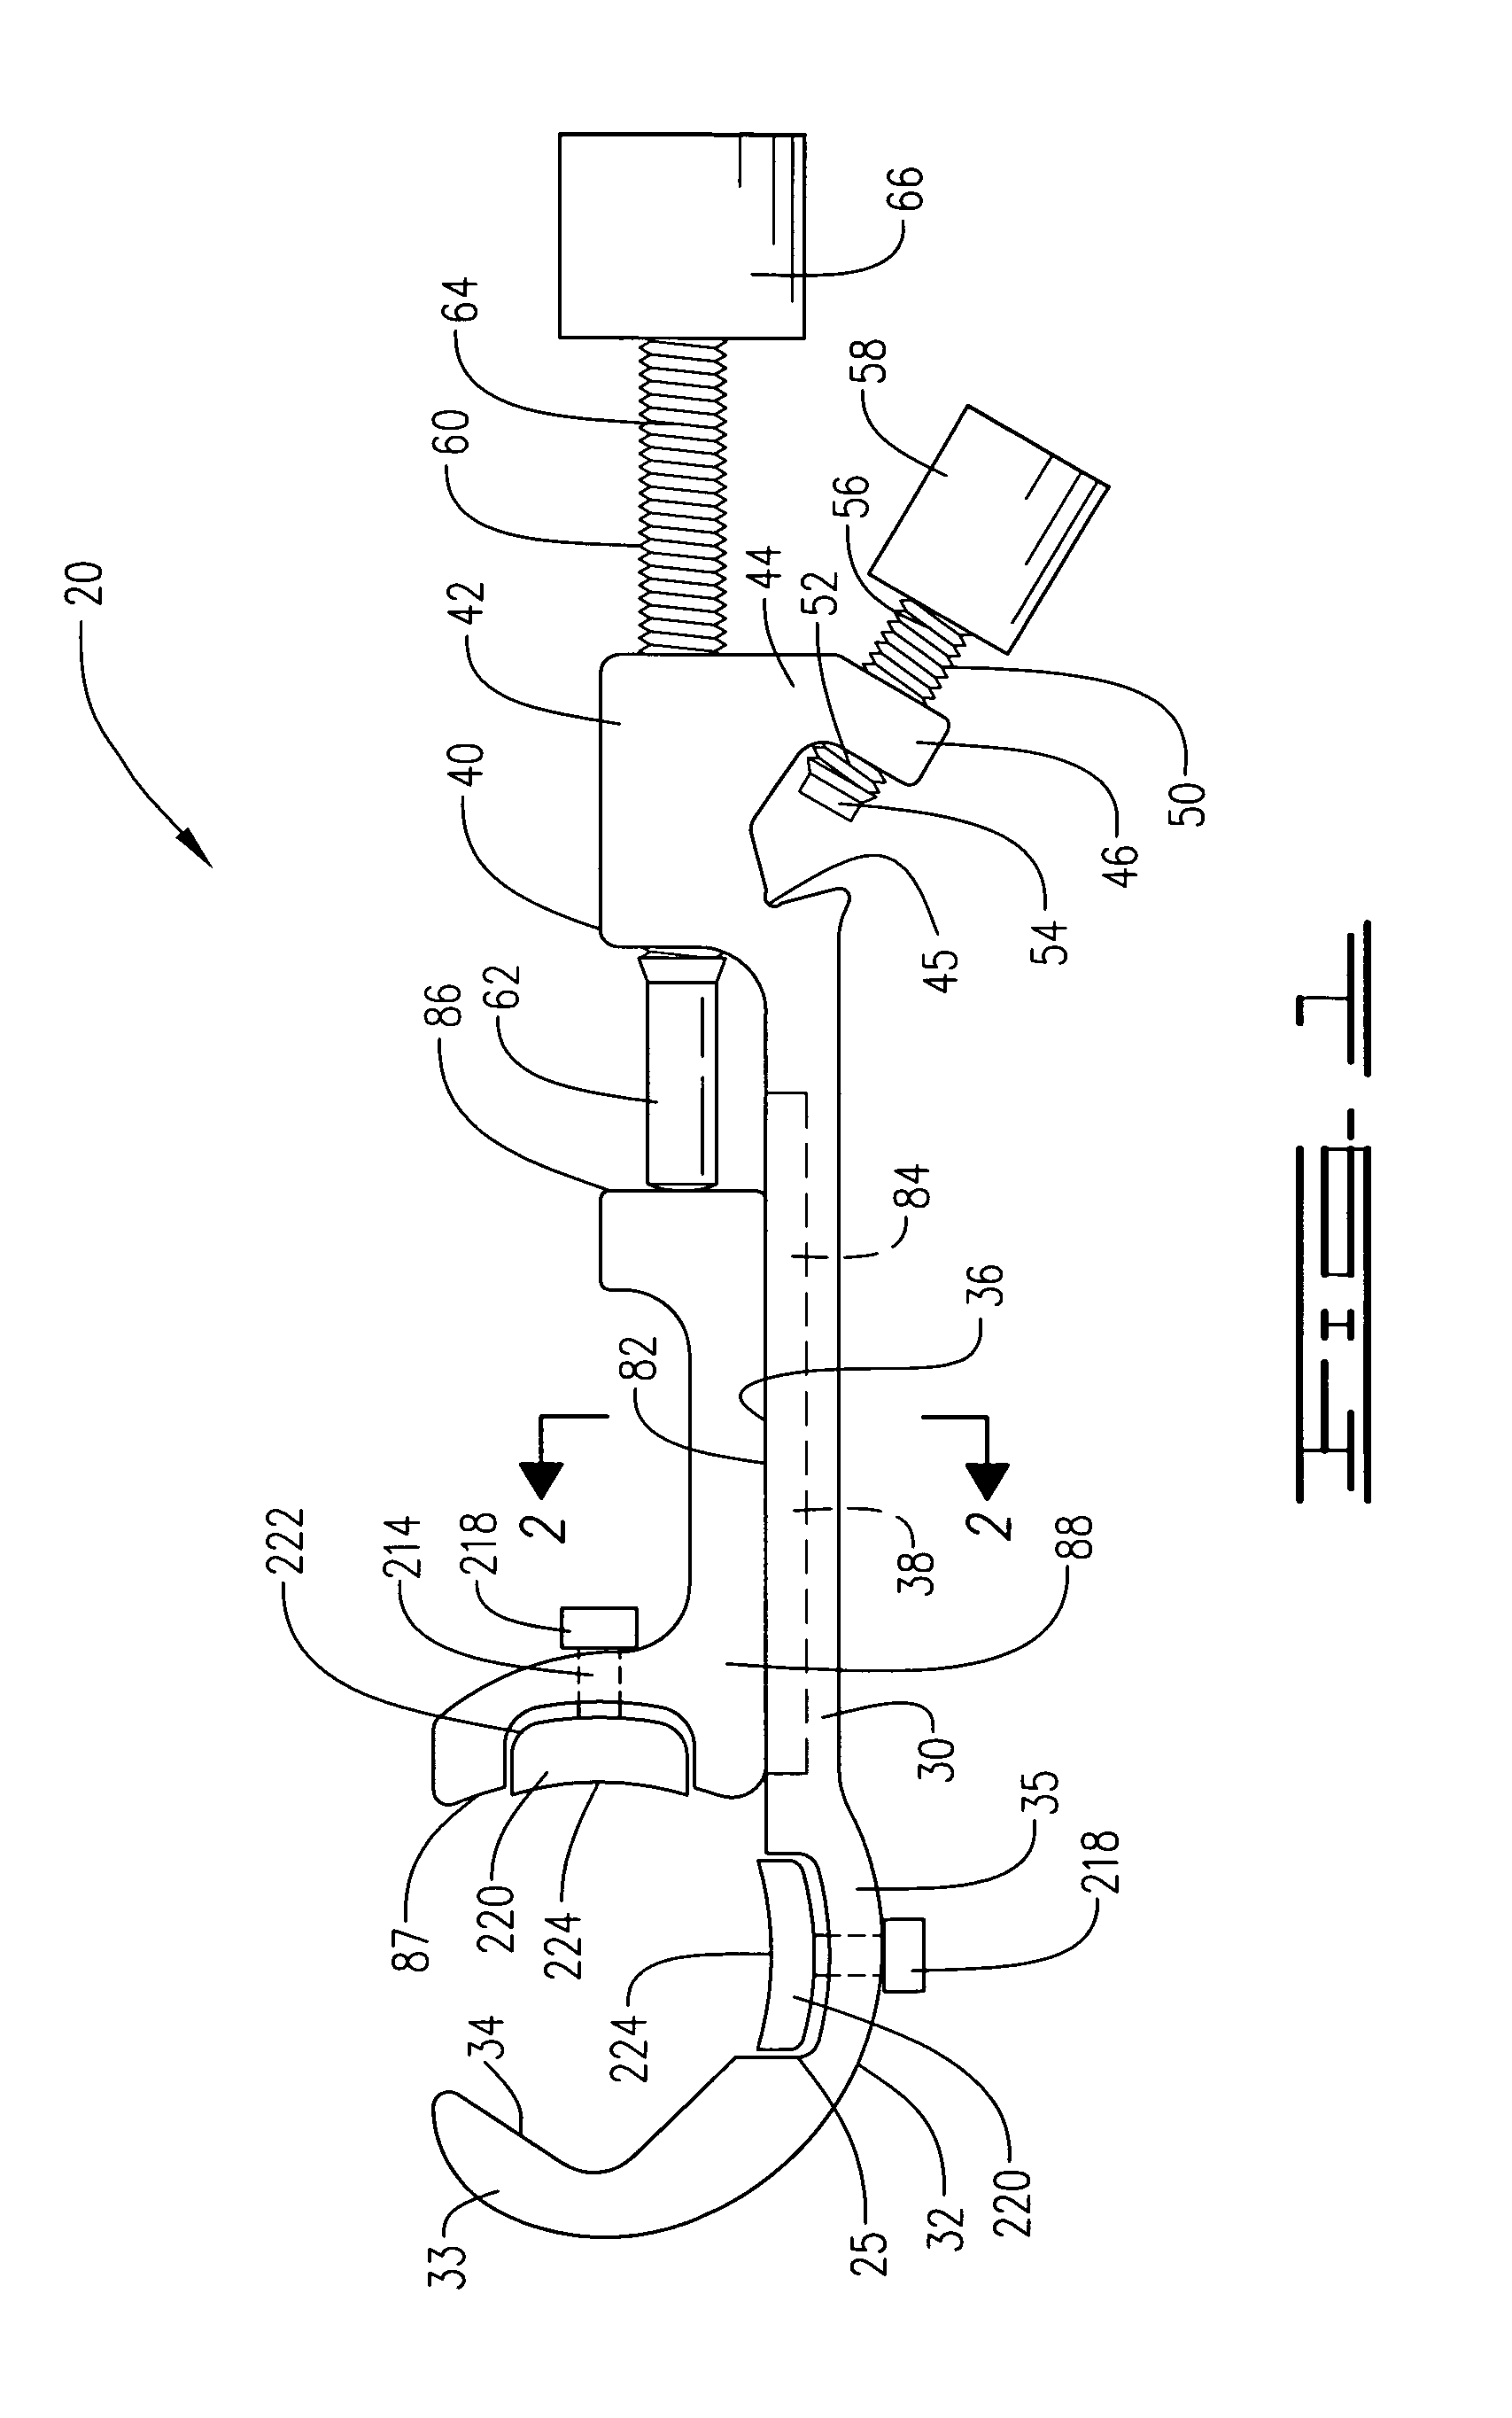 Bone reduction and plate clamp assembly